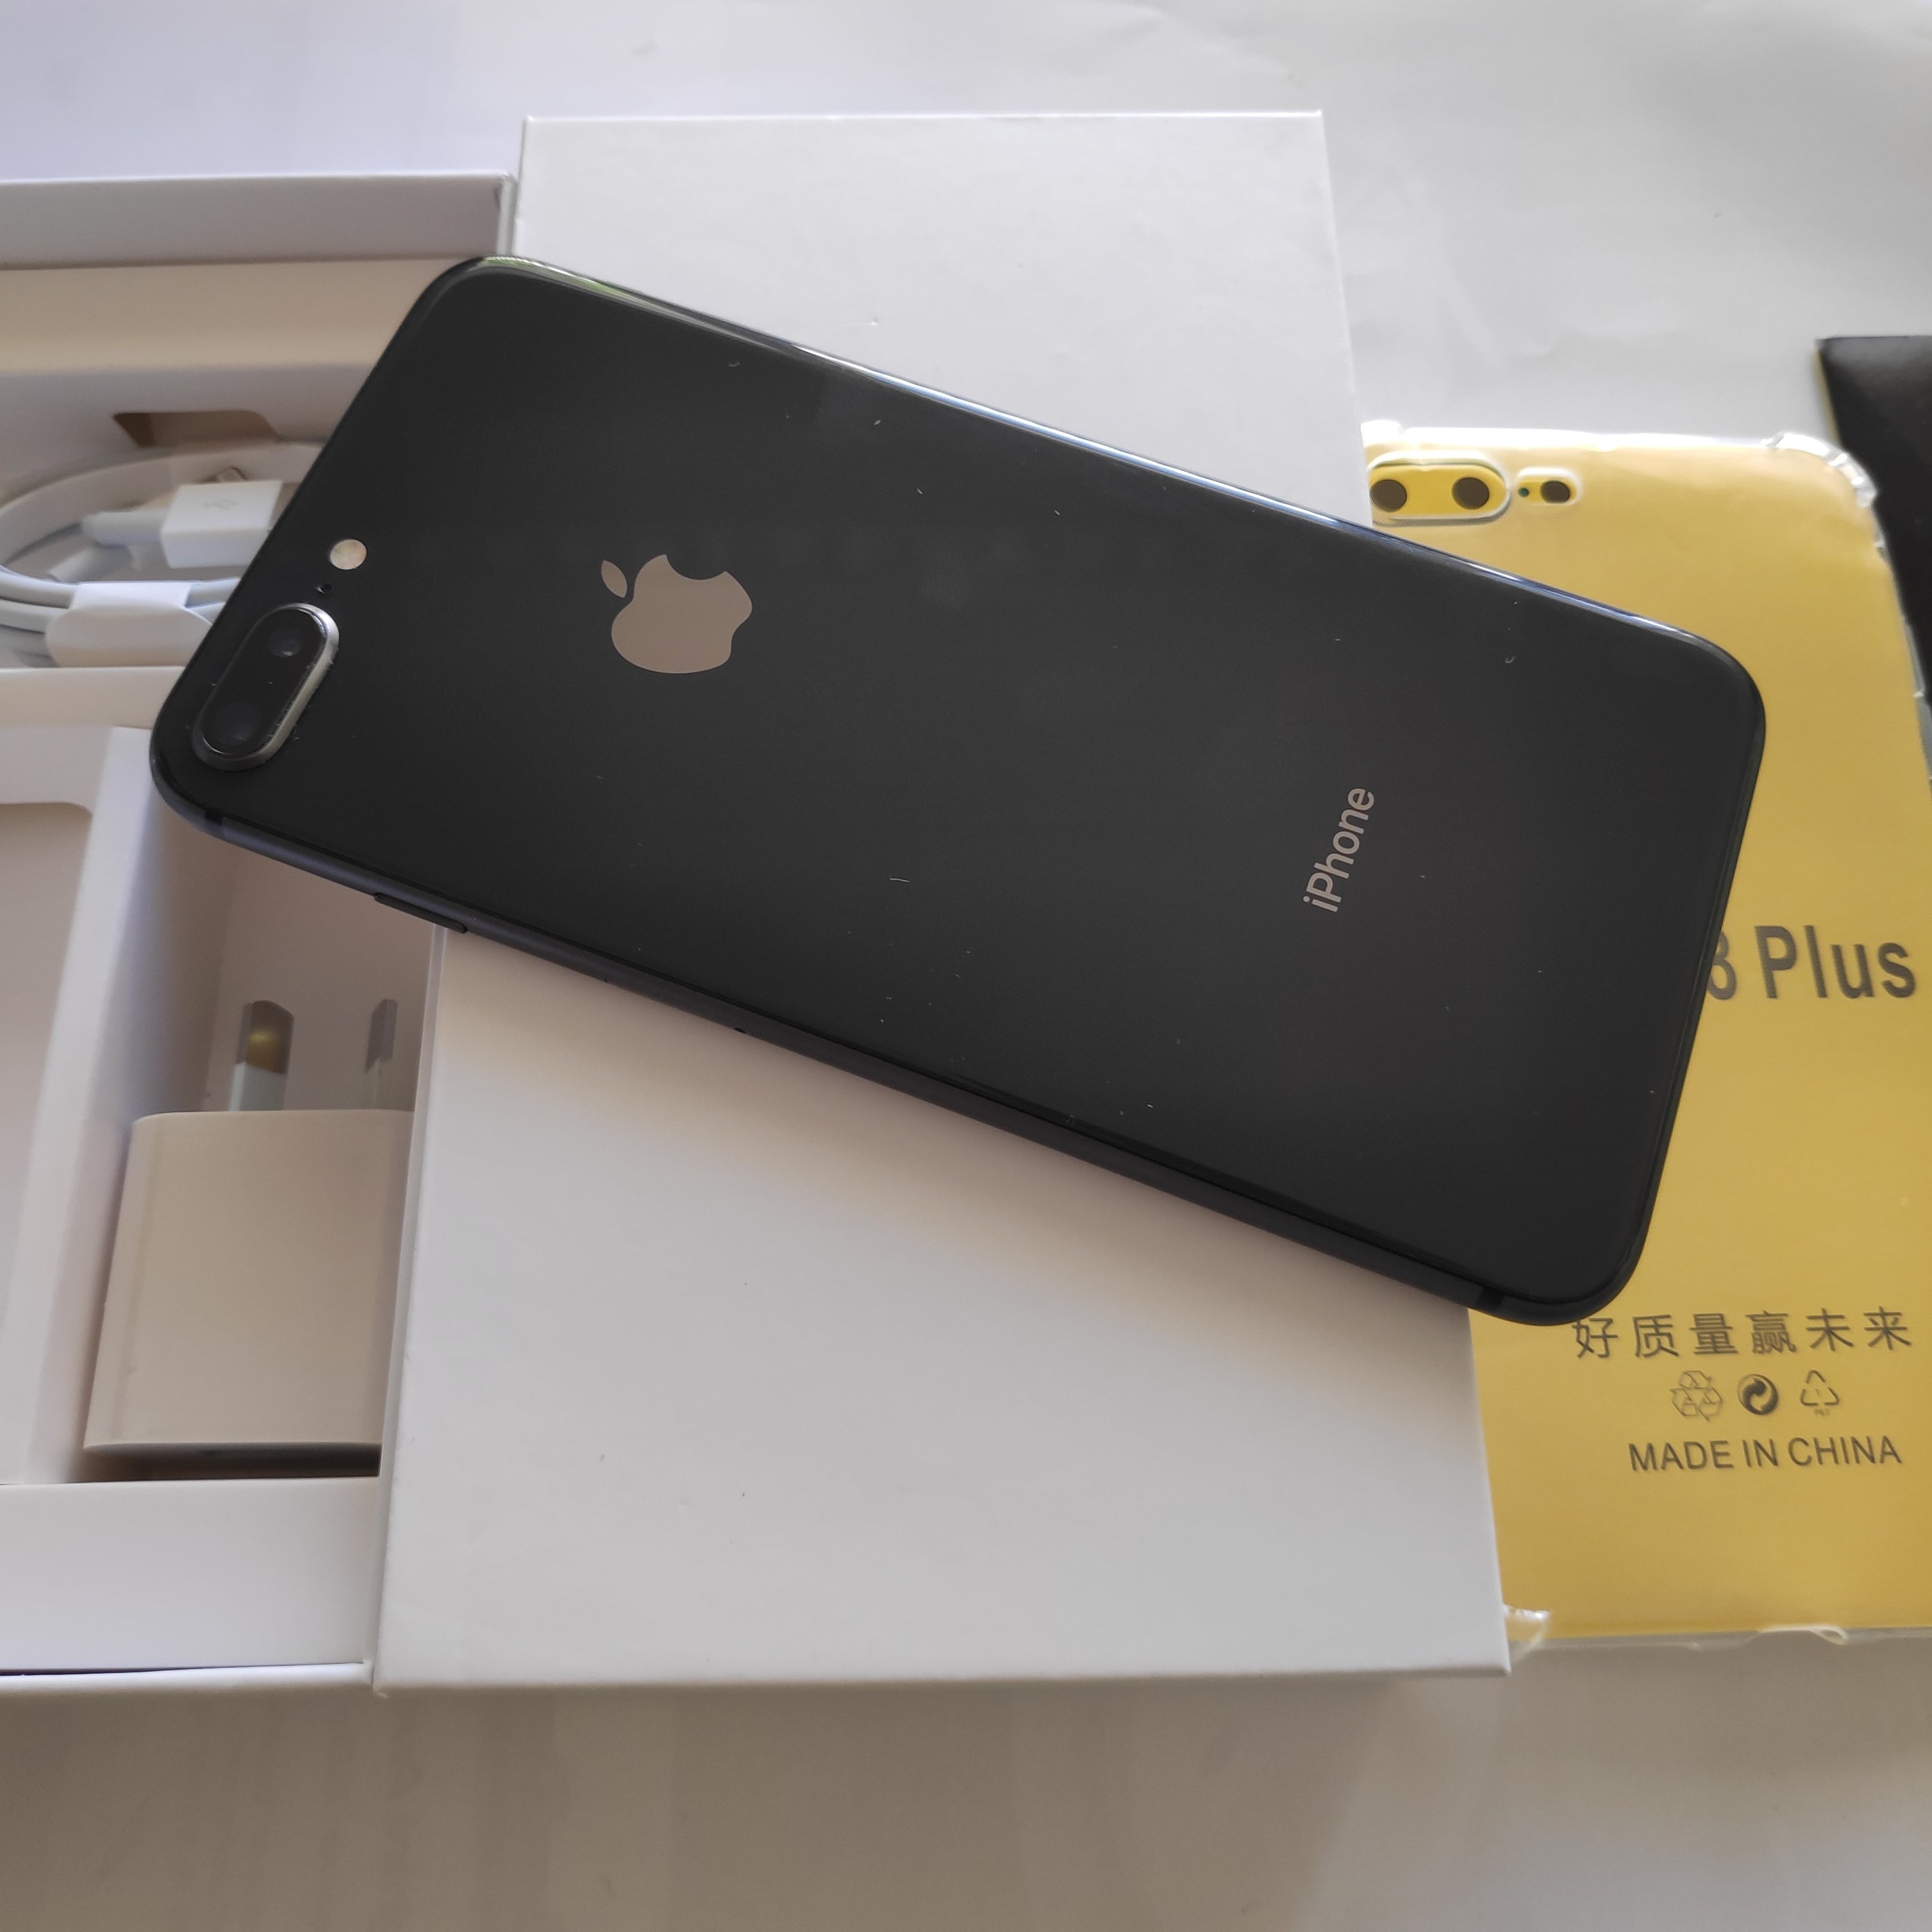 Apple iPhone 8 Plus 256GB Space Gray New Battery, Case, Screen Protector & Shipping (Exc)